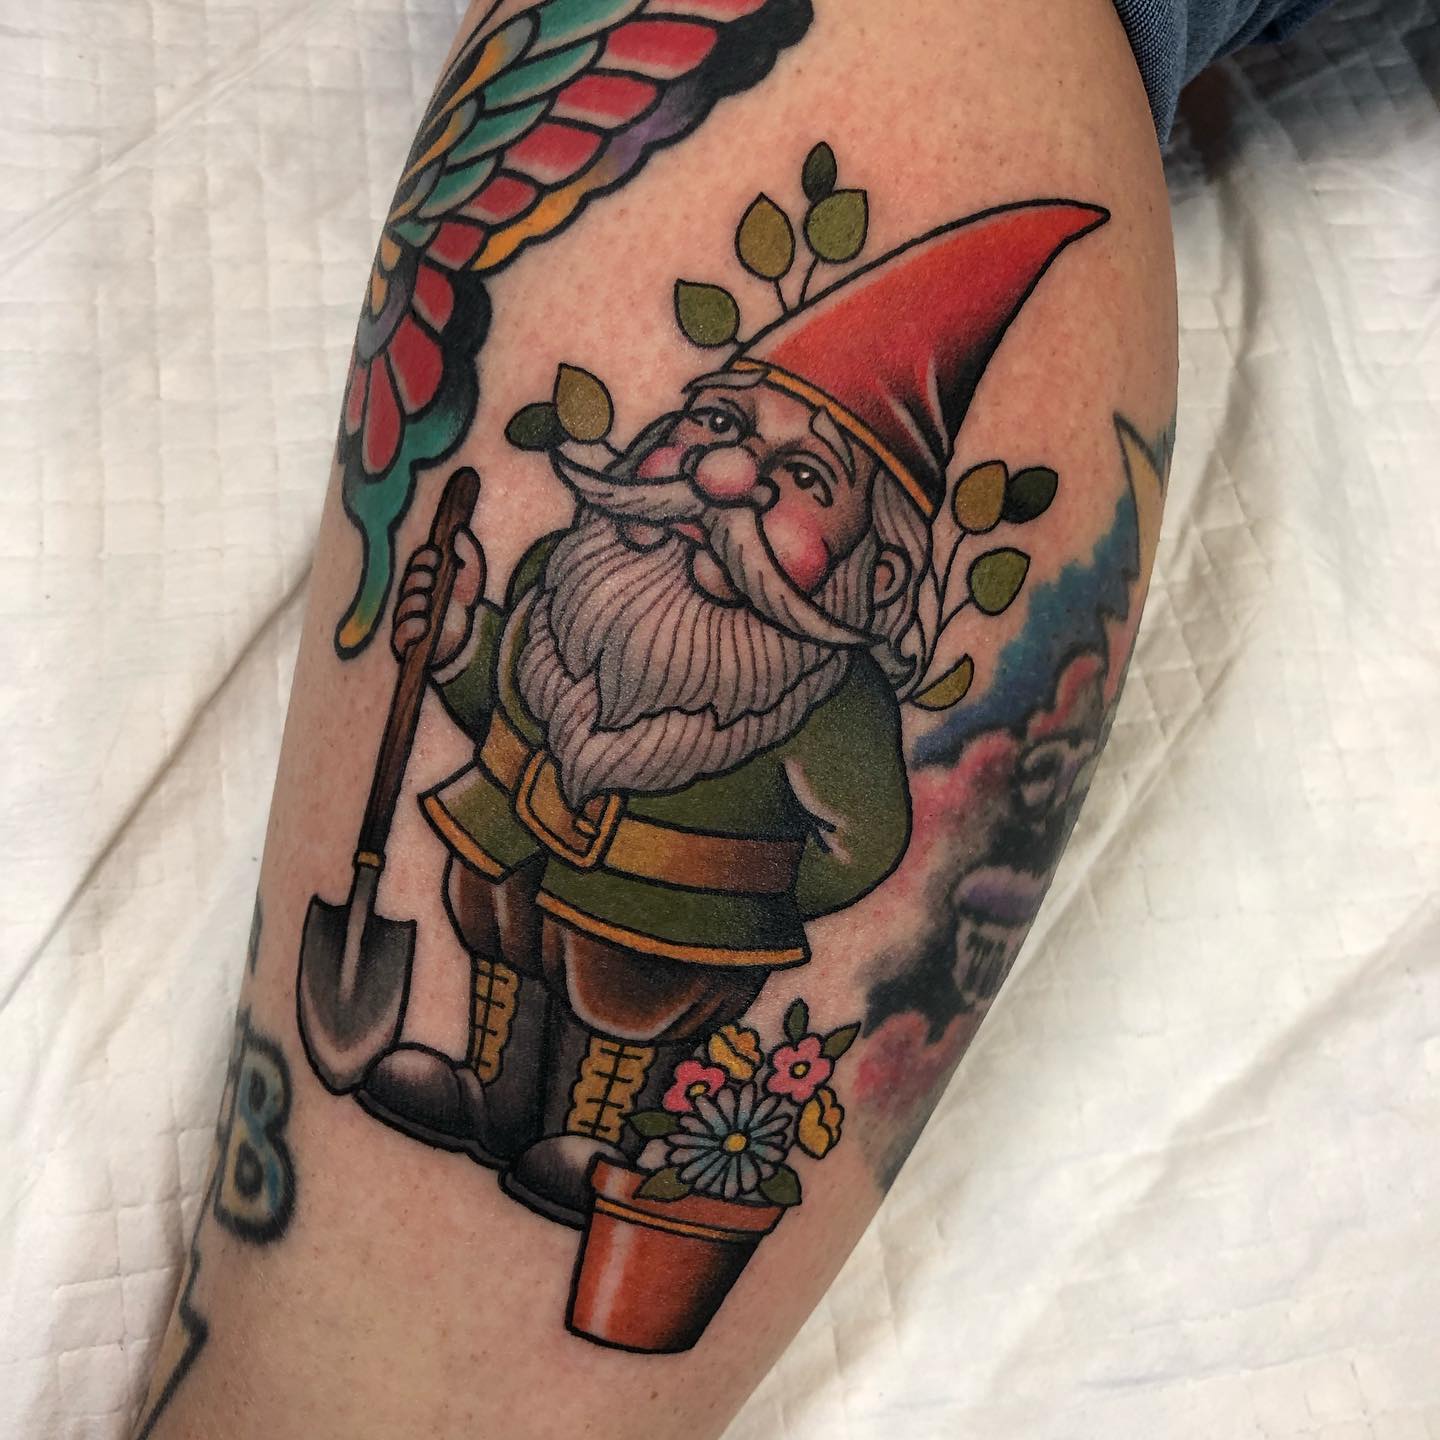 David the Gnome tattoo done by Ashley at BullyInk in Edgewater MD  r gnomes